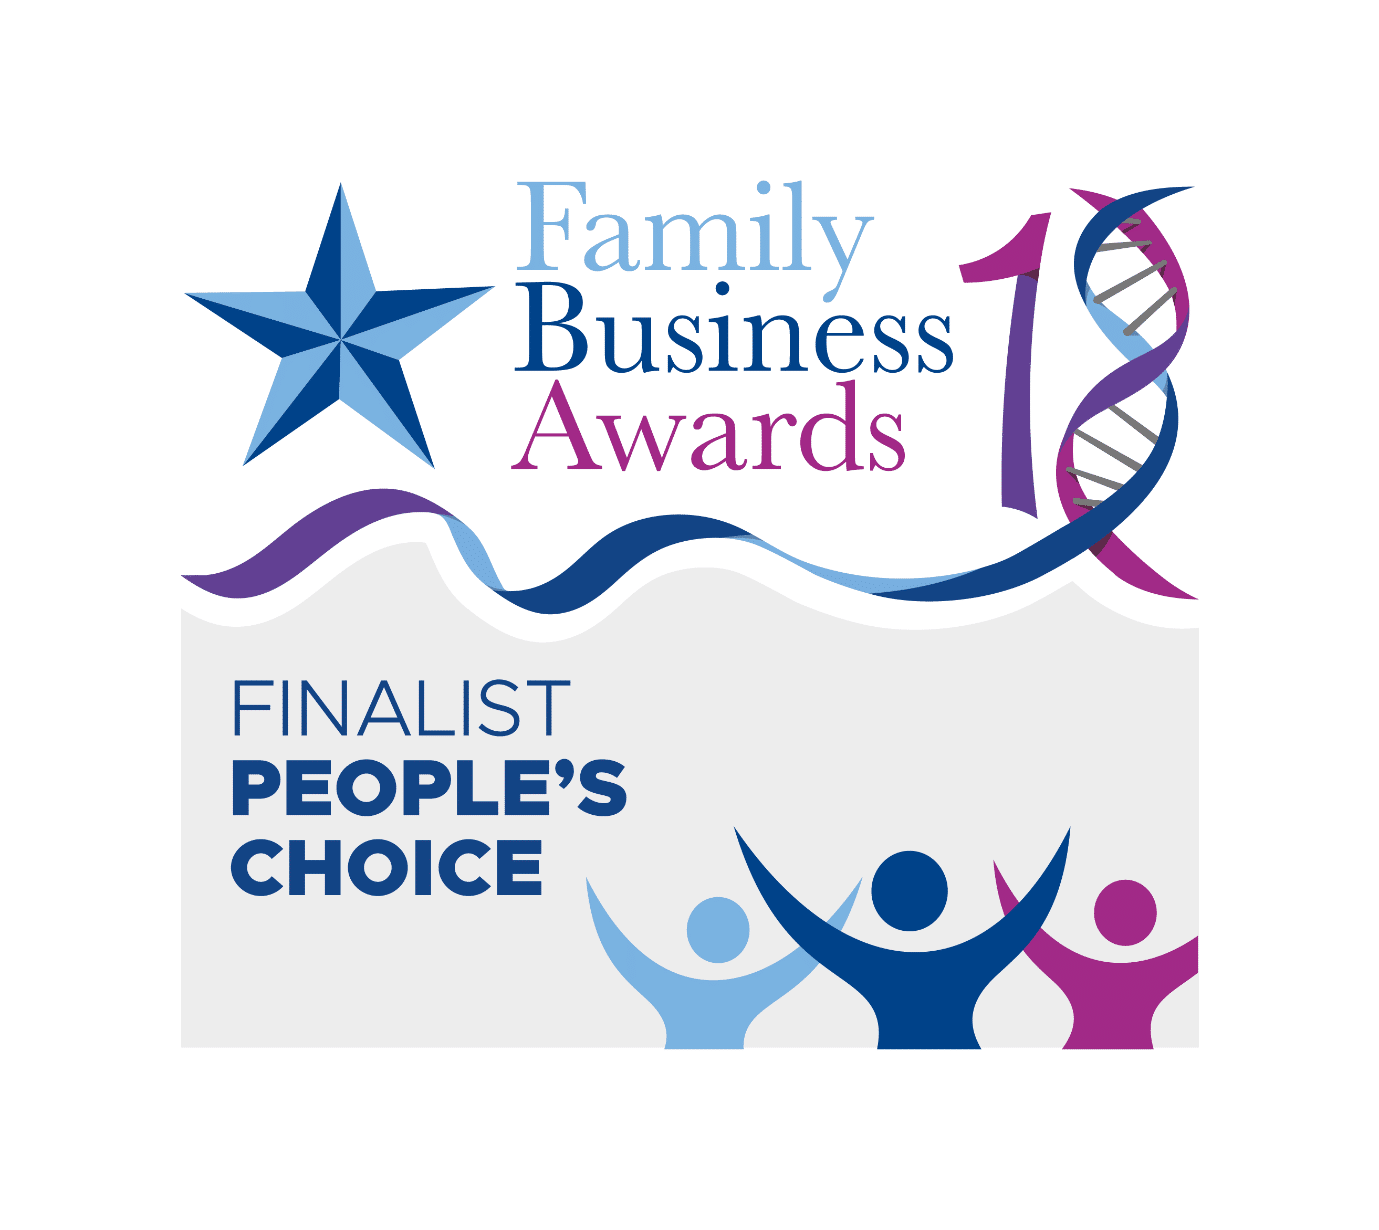 Chance to vote for local family business, H2O Hygiene, in top award